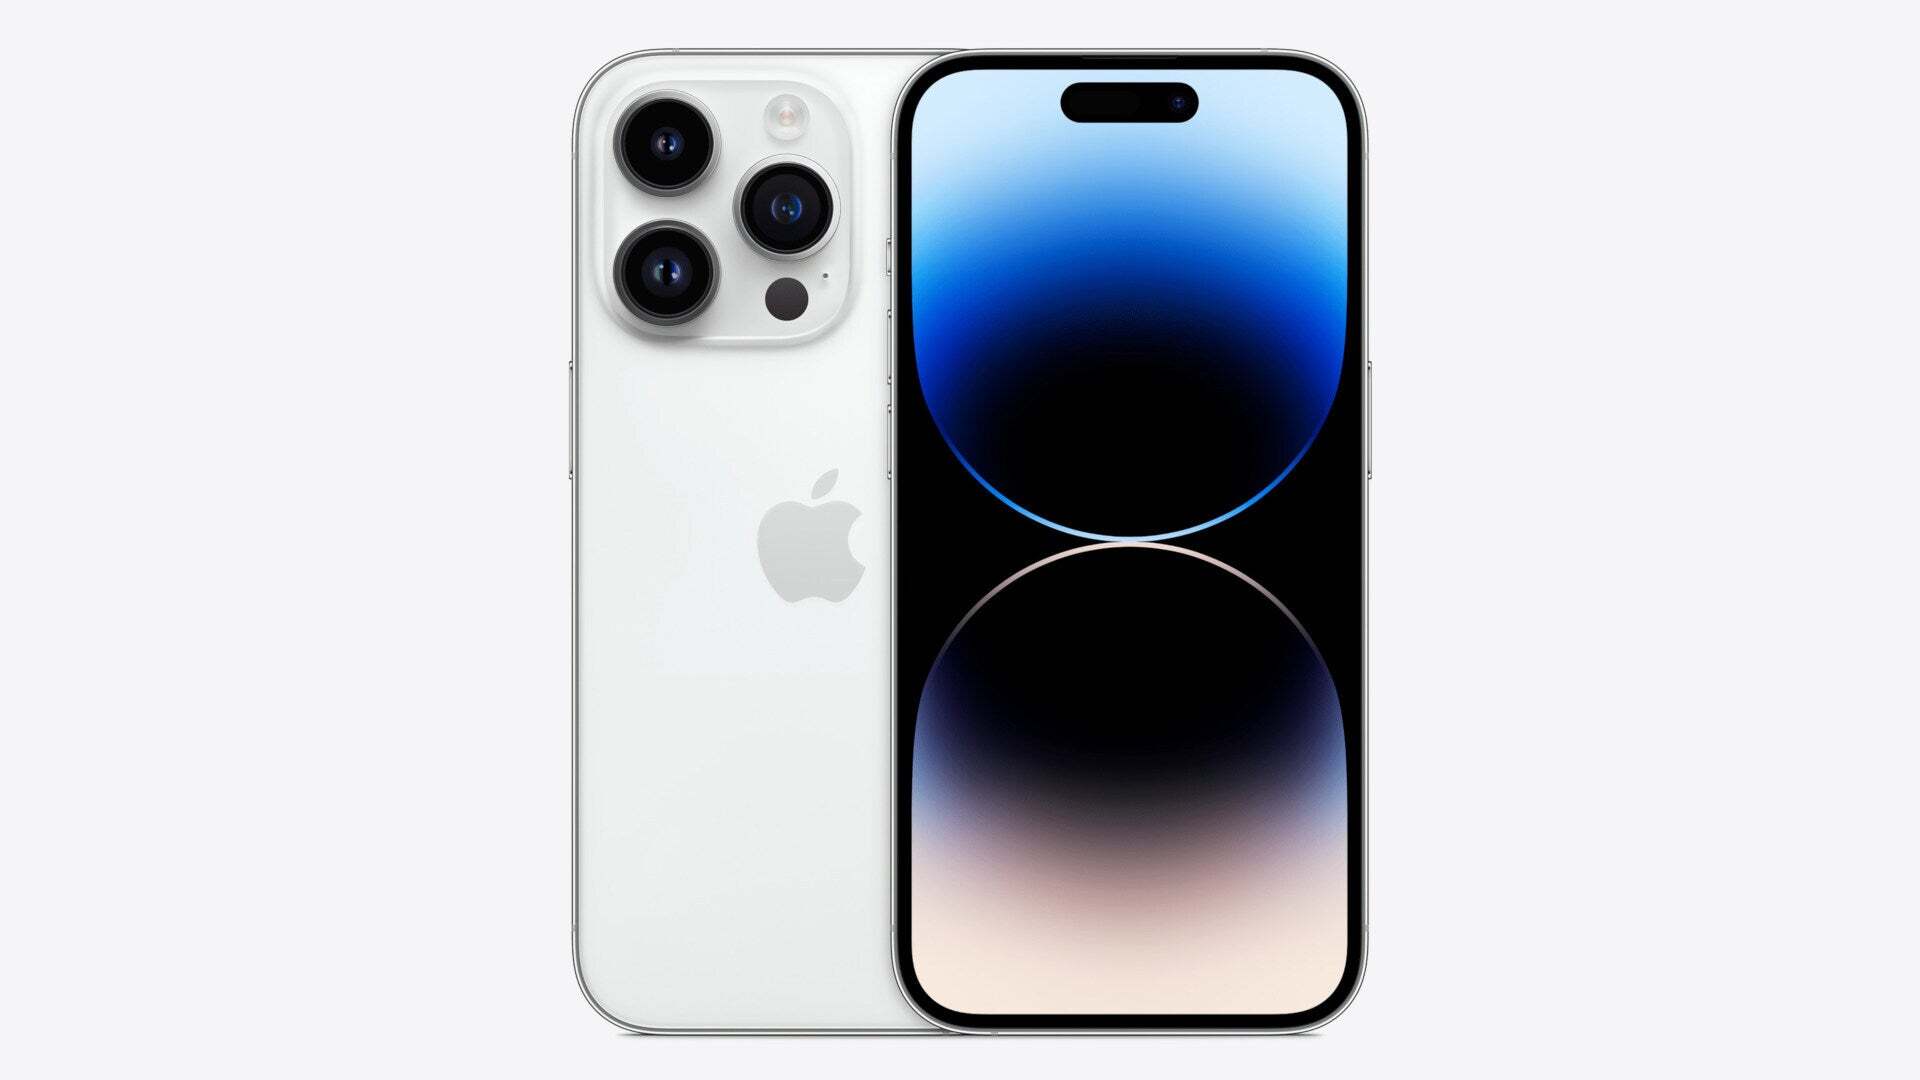 The iPhone 14 Pro showcasing Silver (Image Source - Apple) - iPhone 16 colors: all the rumored shades